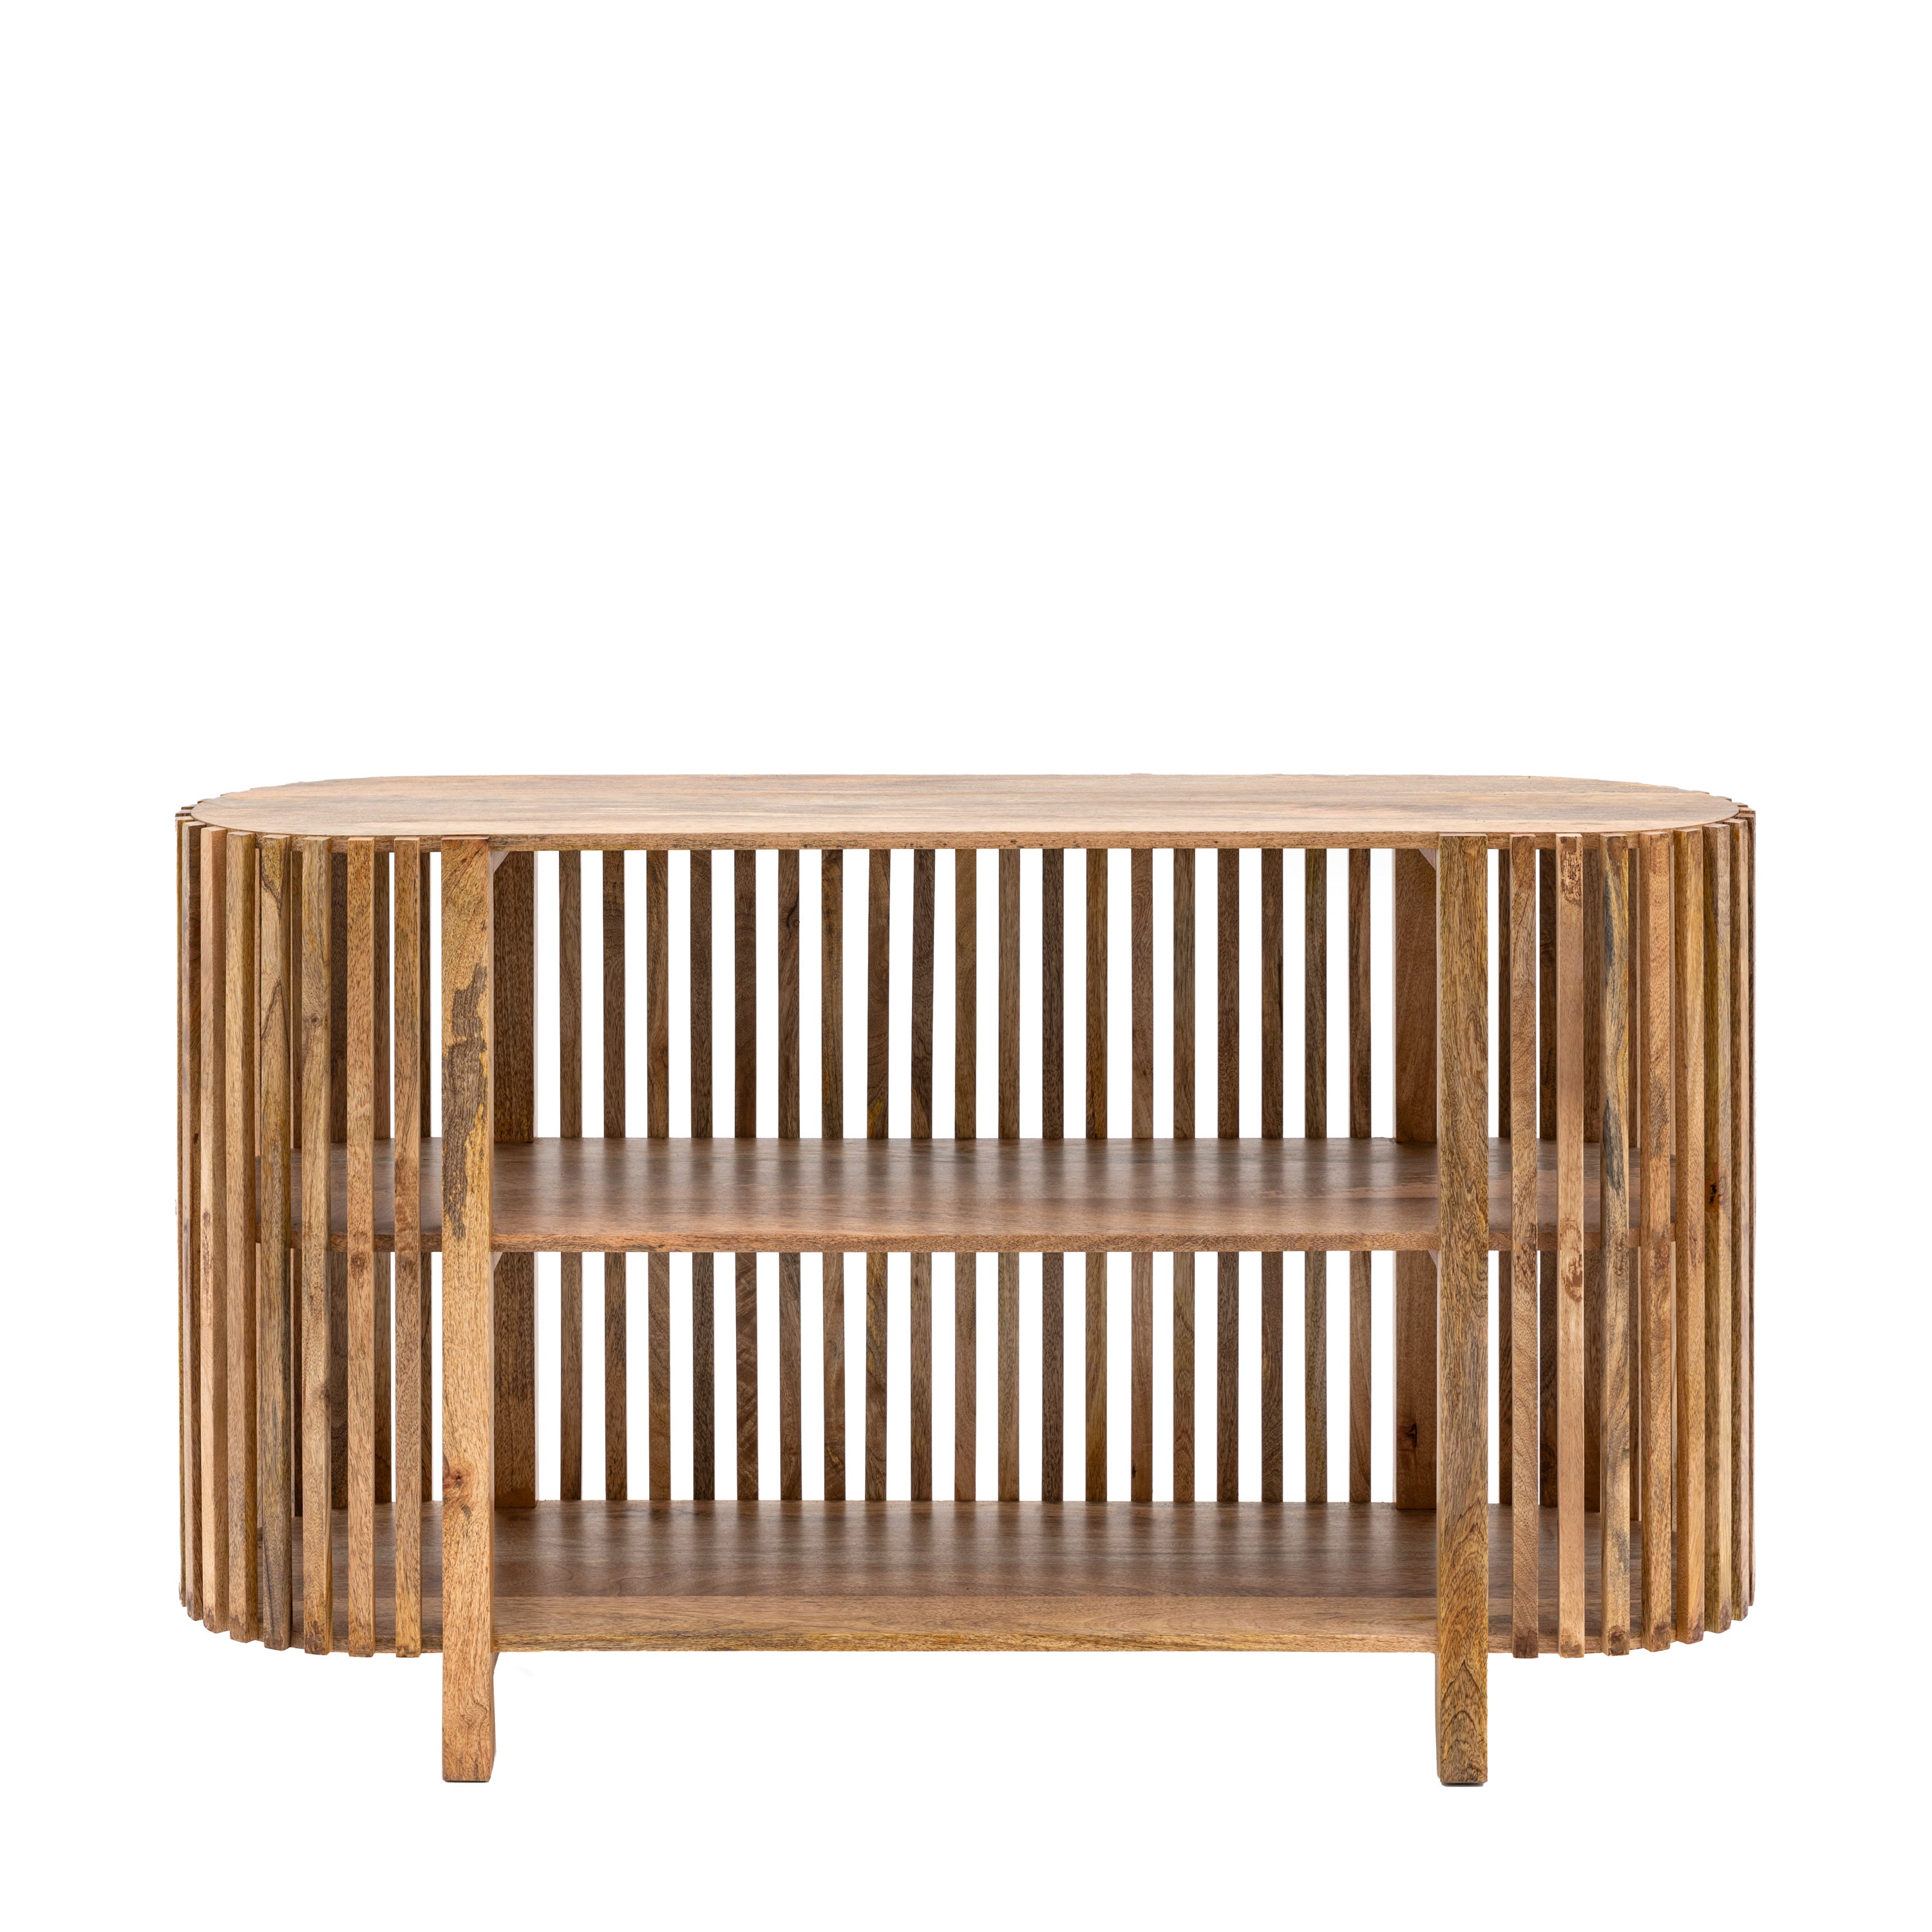 Voss Slatted Console Table - HUS & CO.